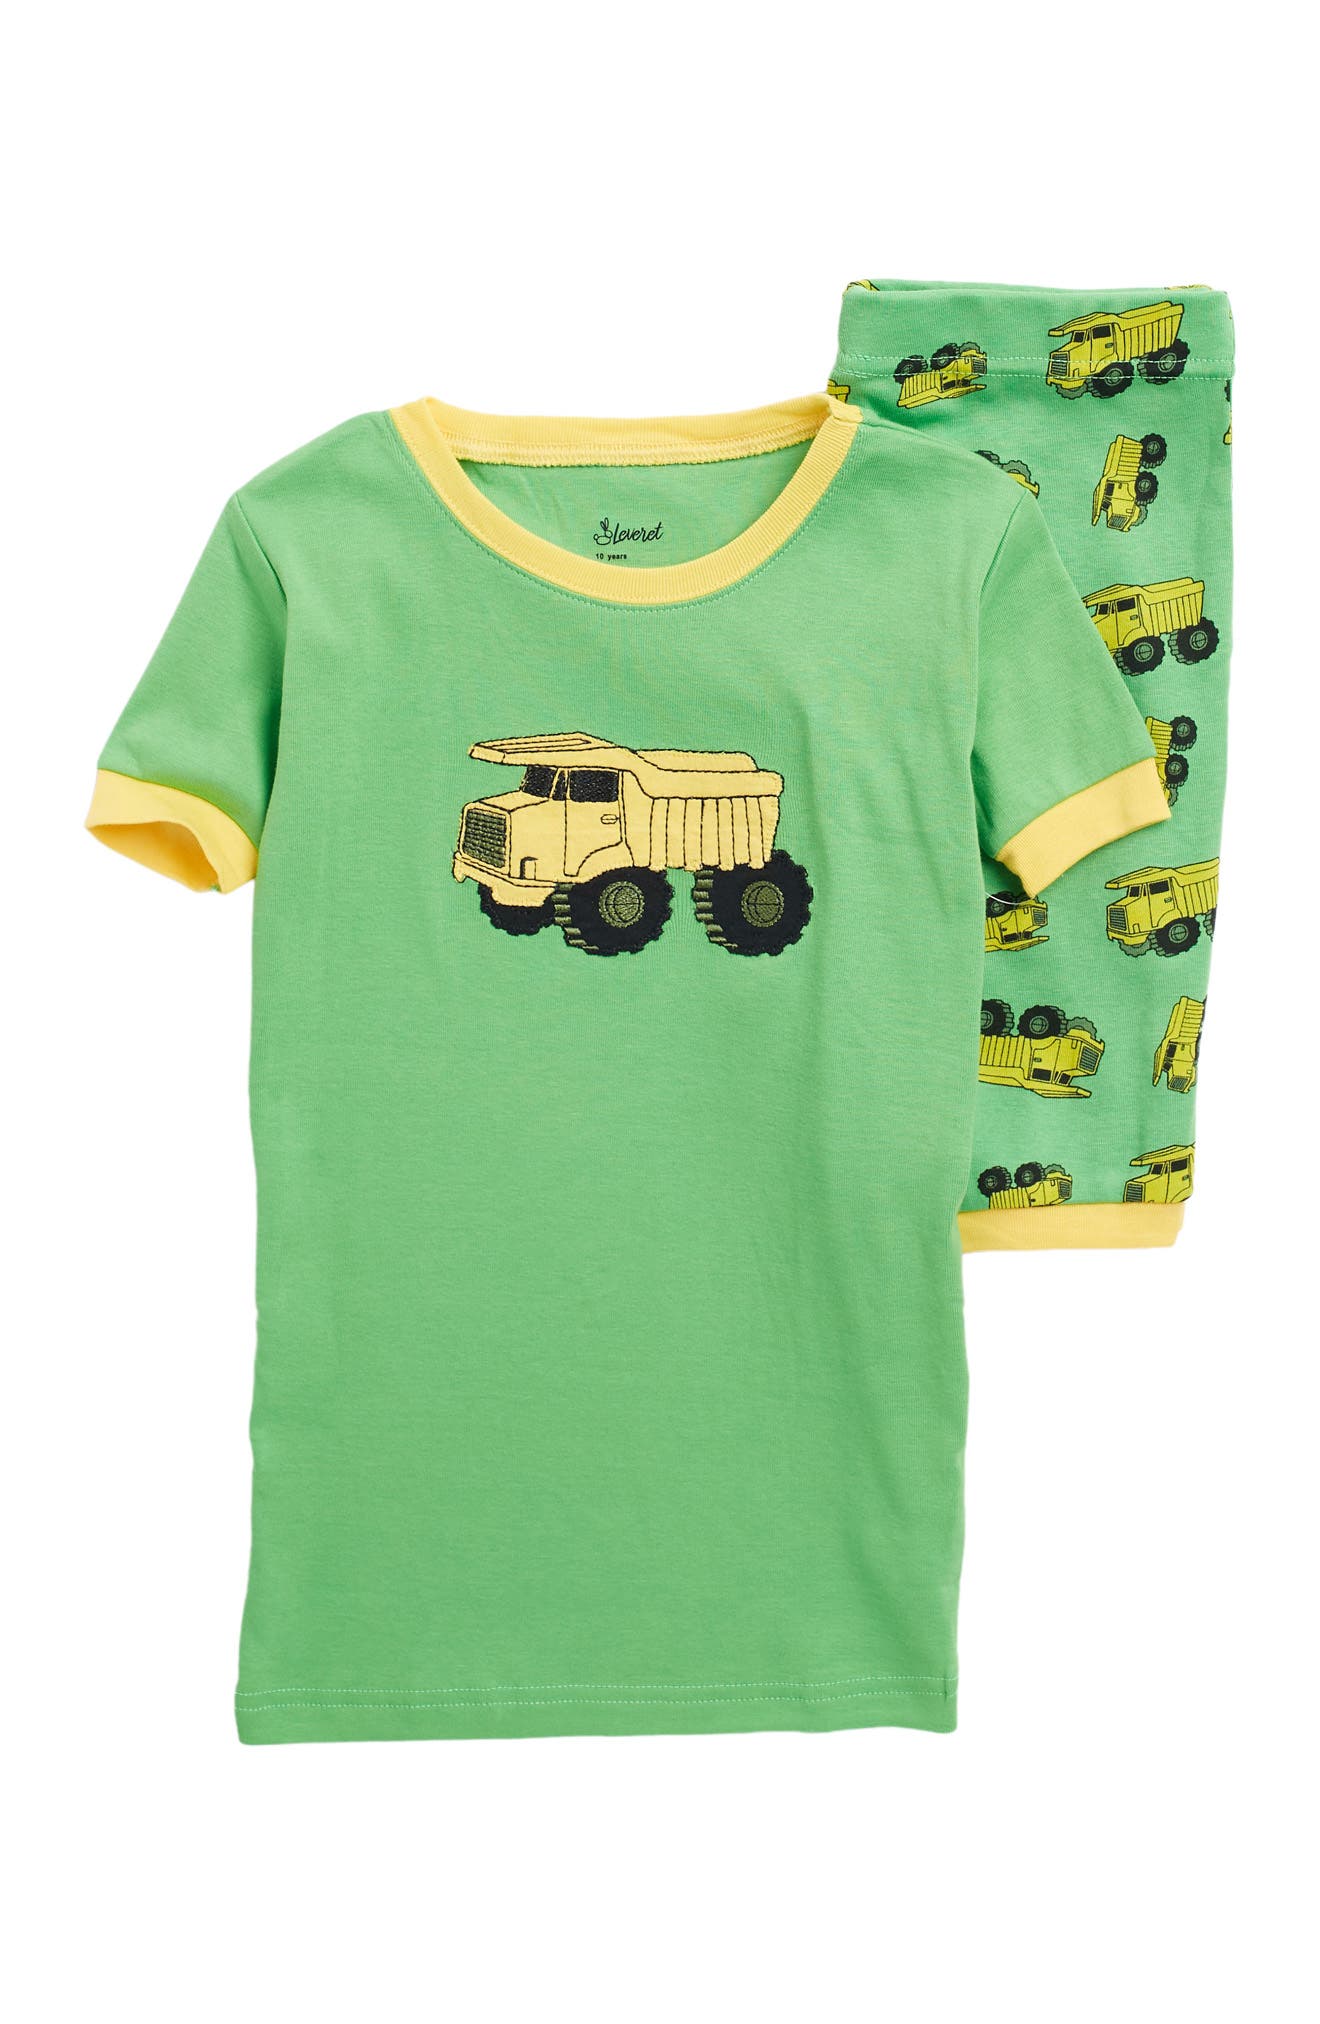 Infant Boys Baby Outfit Construction Dump Truck Long Sleeve Shirt & Overall Set